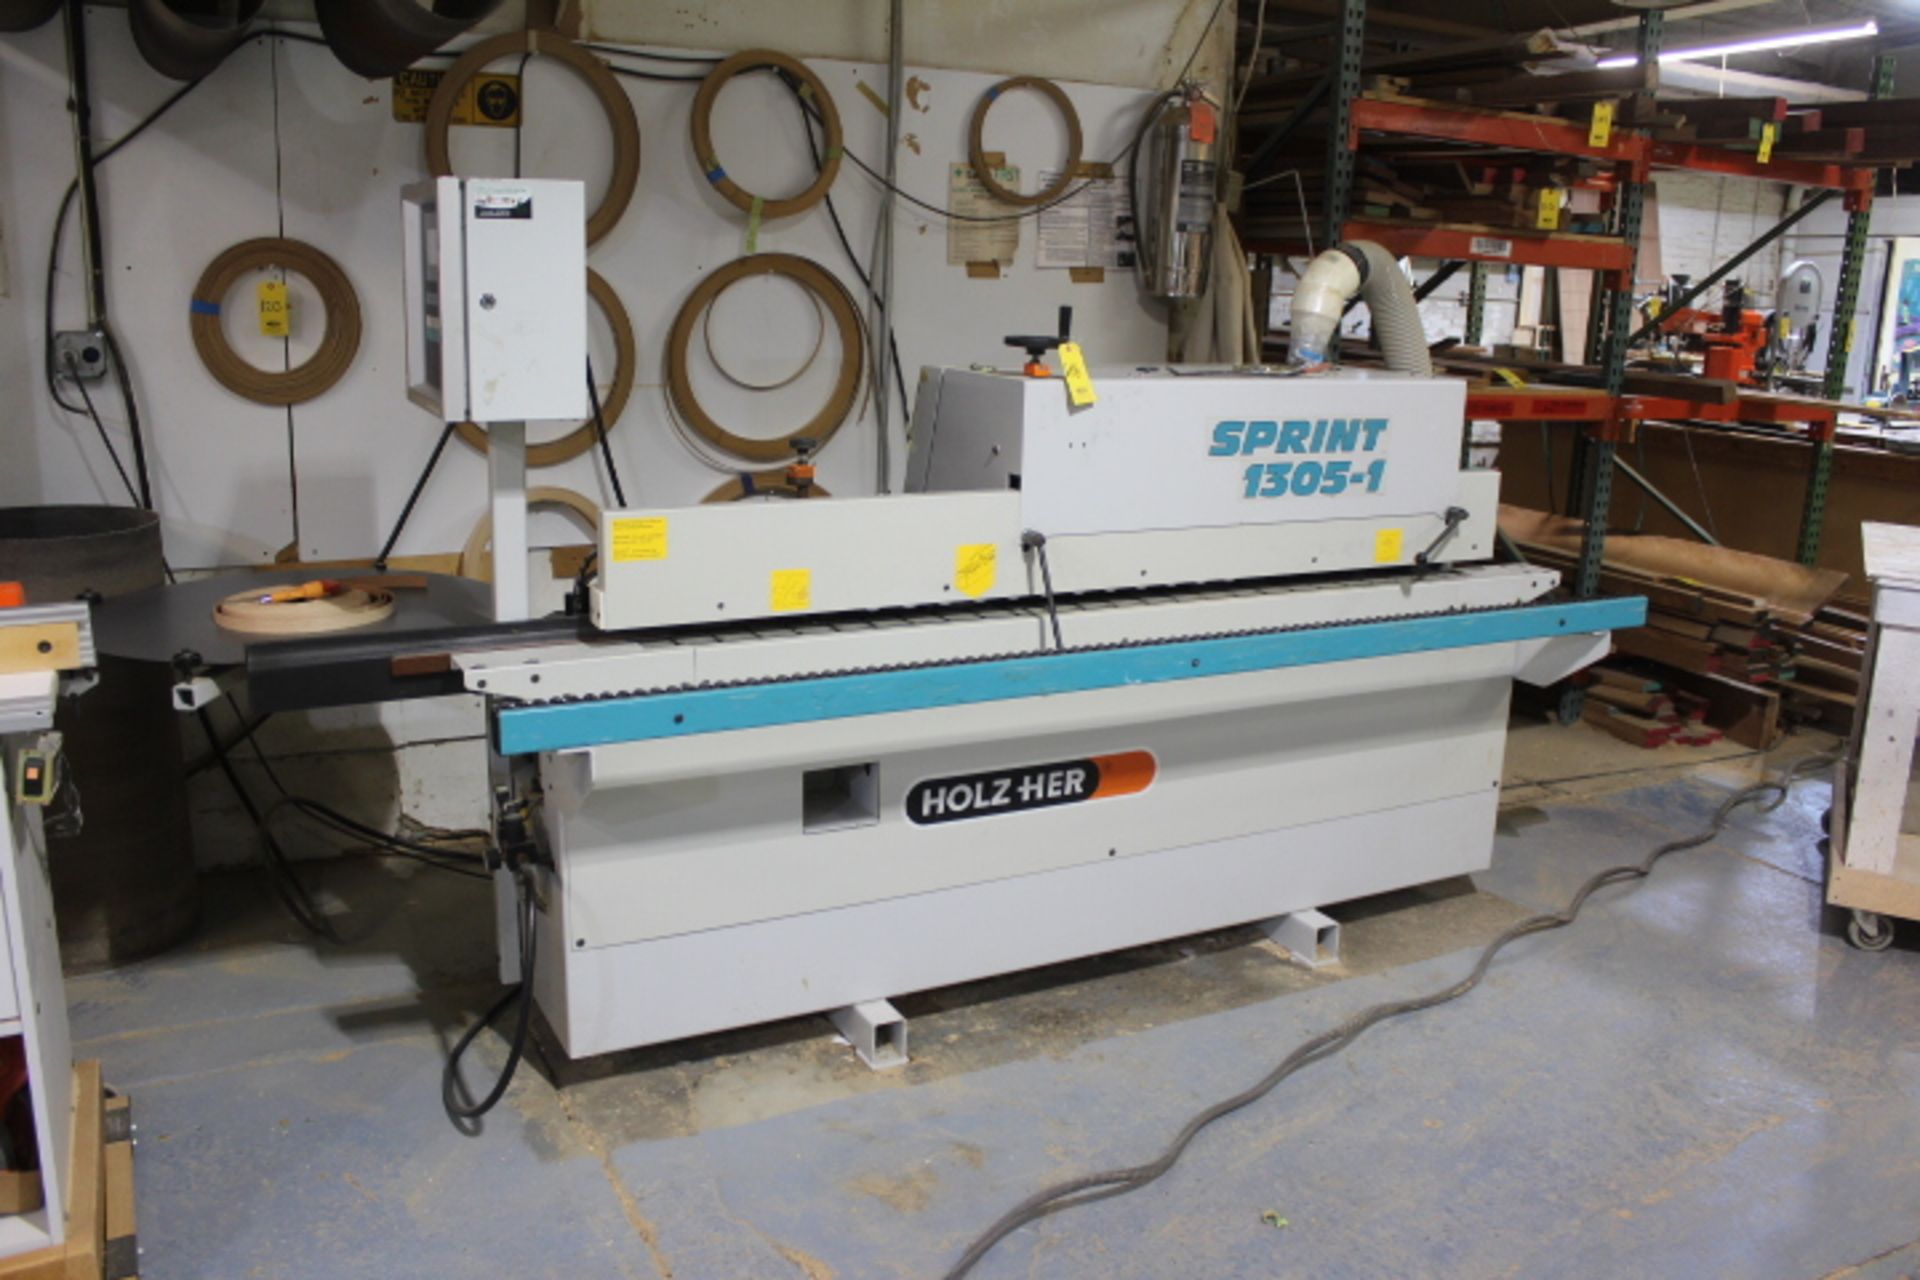 2003 HOLZHER SPRINT 1305-1 SINGLE SIDED EDGE BANDER, S/N 521/0-308, 3 MM EDGE THICKNESS…